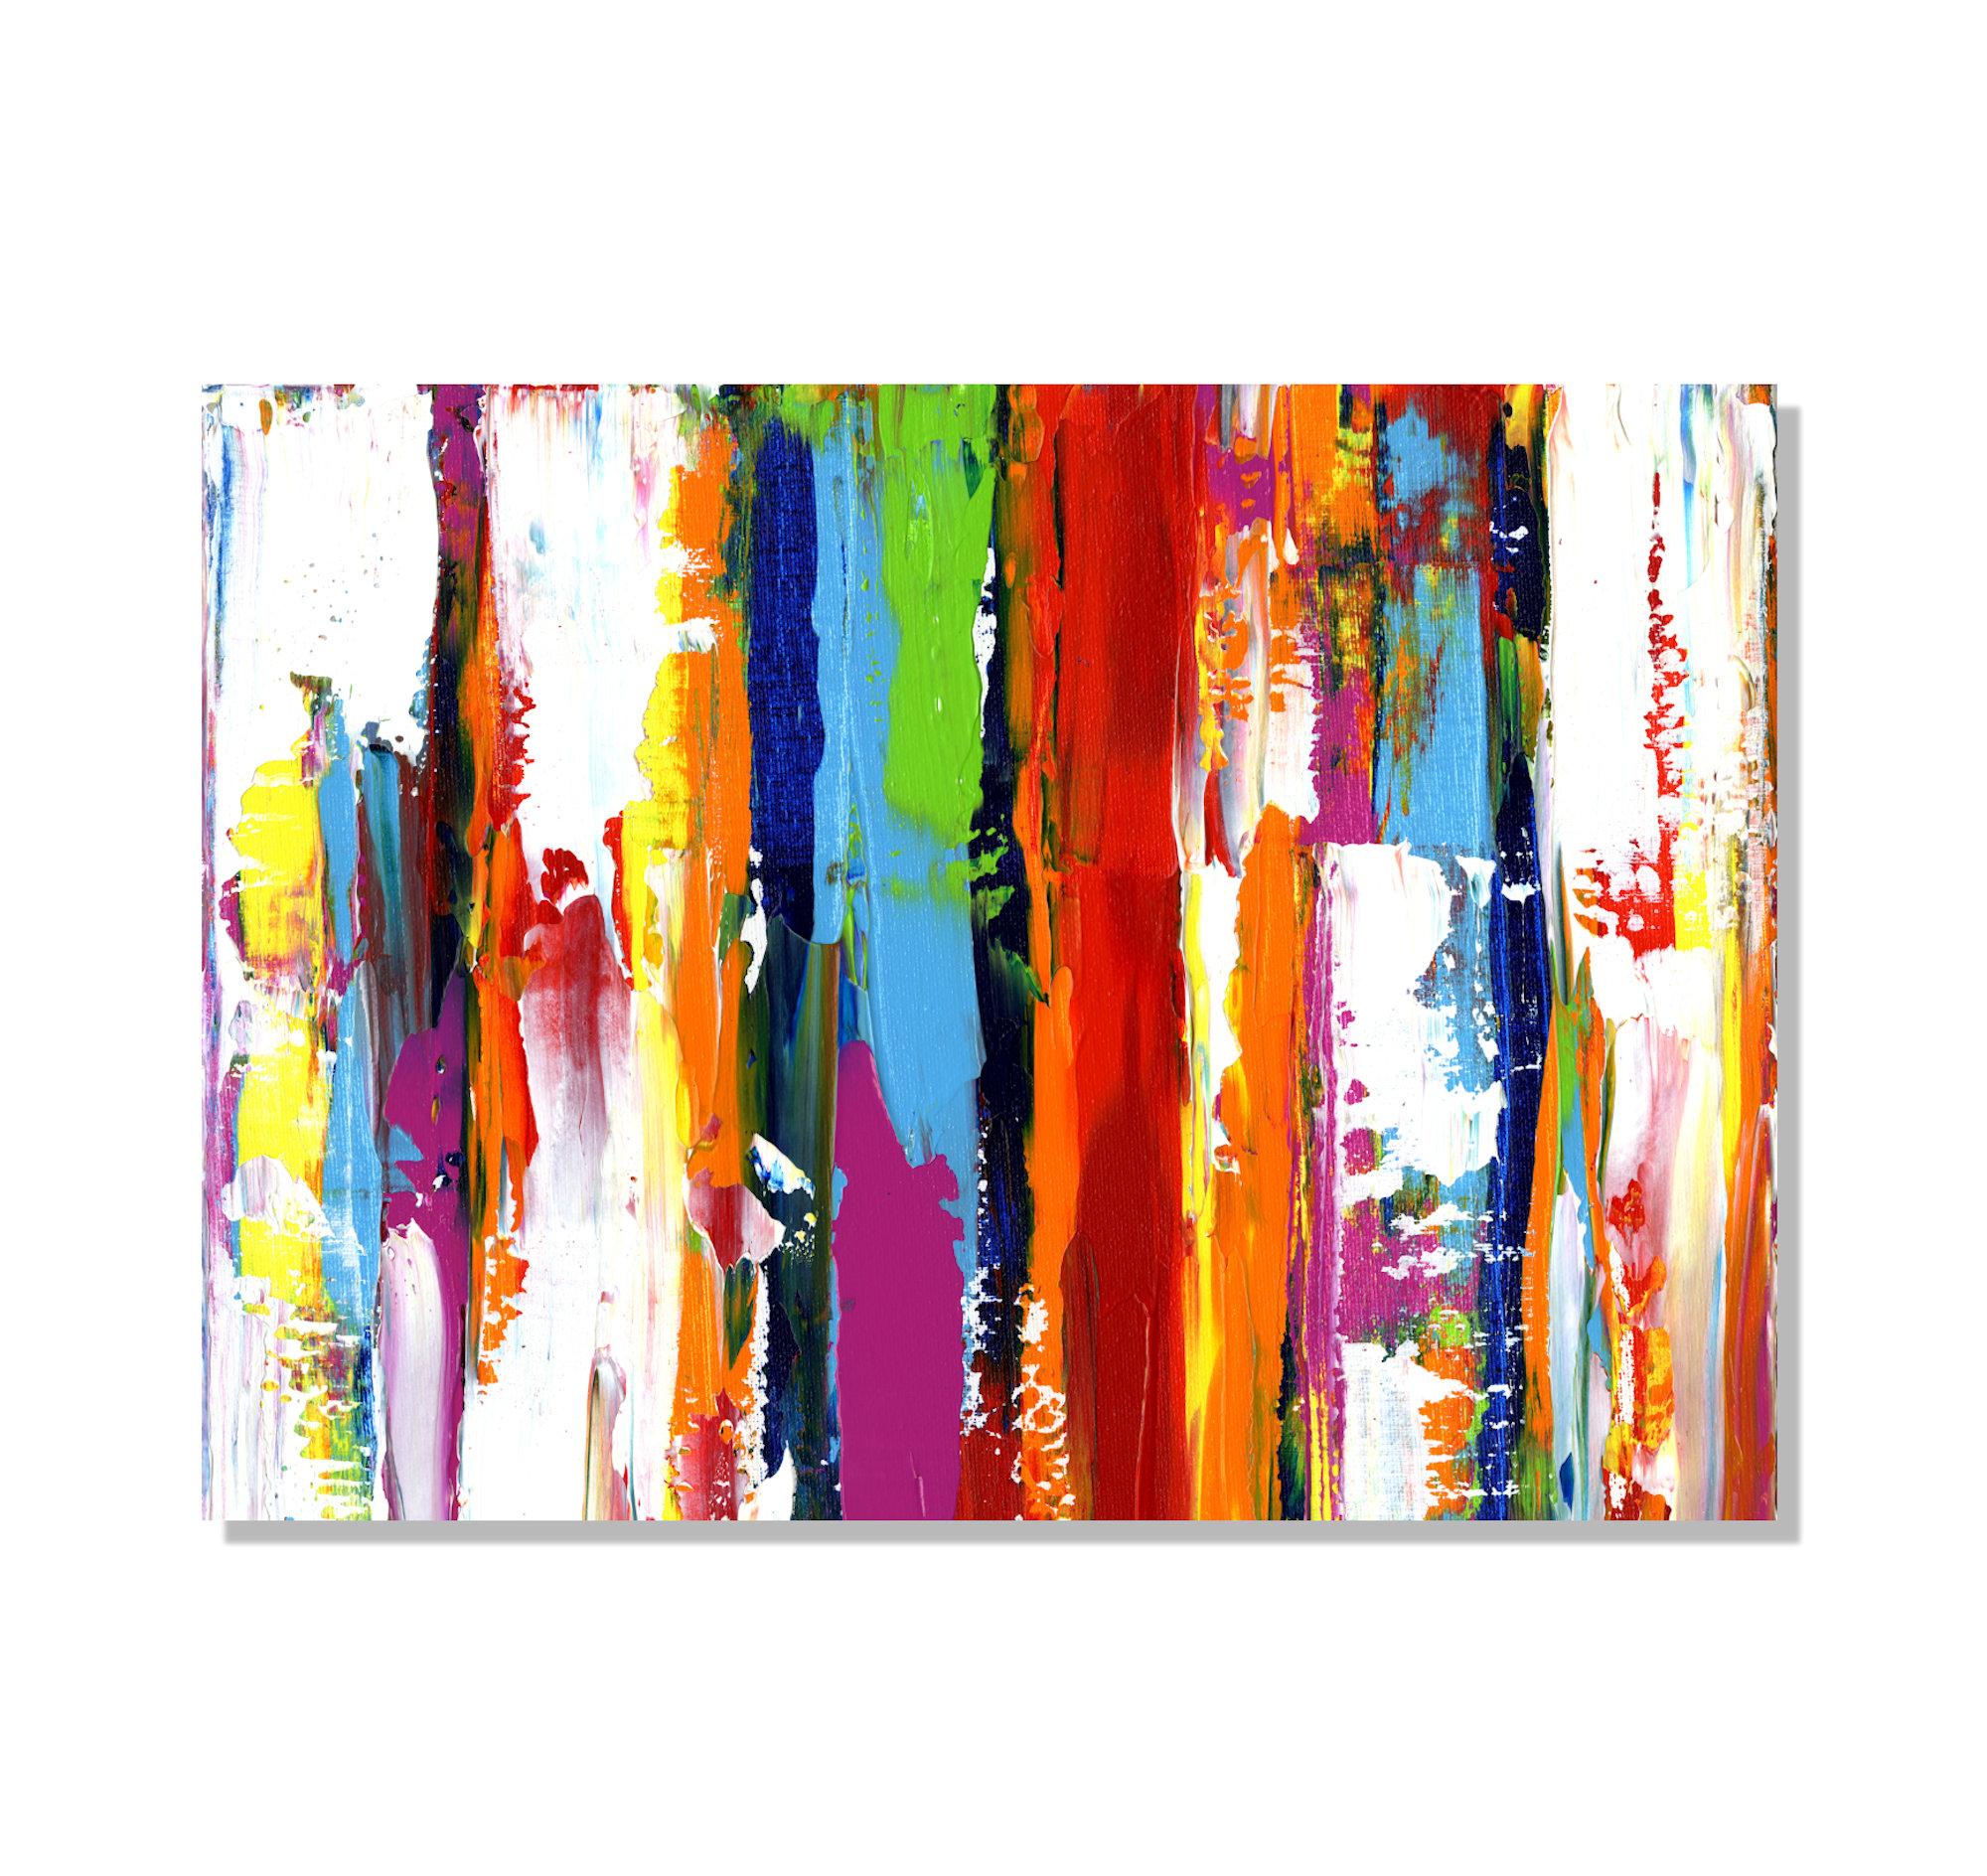 This contemporary colorful abstract painting is printed on a lightweight metal composite and comes ready to hang. The automotive high-gloss clear coat offers both UV protection and high-end modern finish. This vibrant composition can be hung both